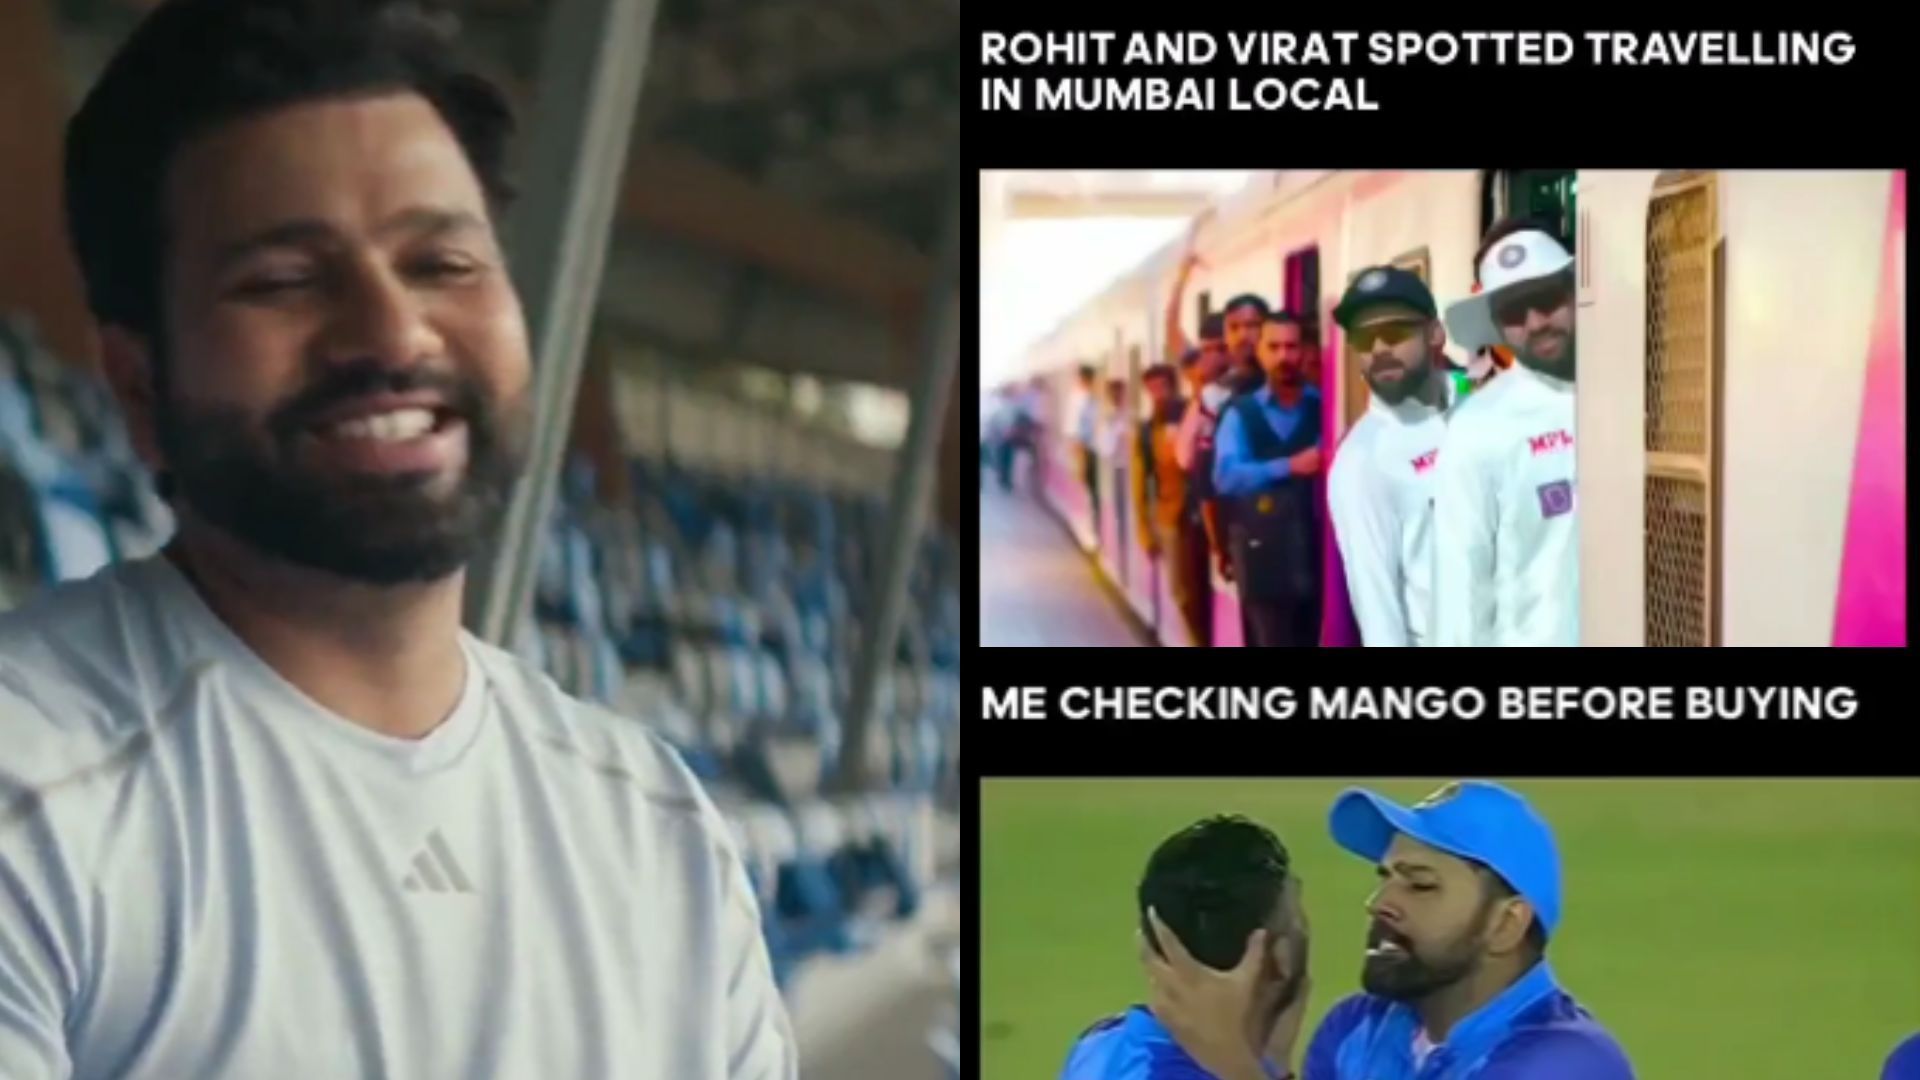 Rohit Sharma reacting to the memes made on him (P.C.:Twitter)